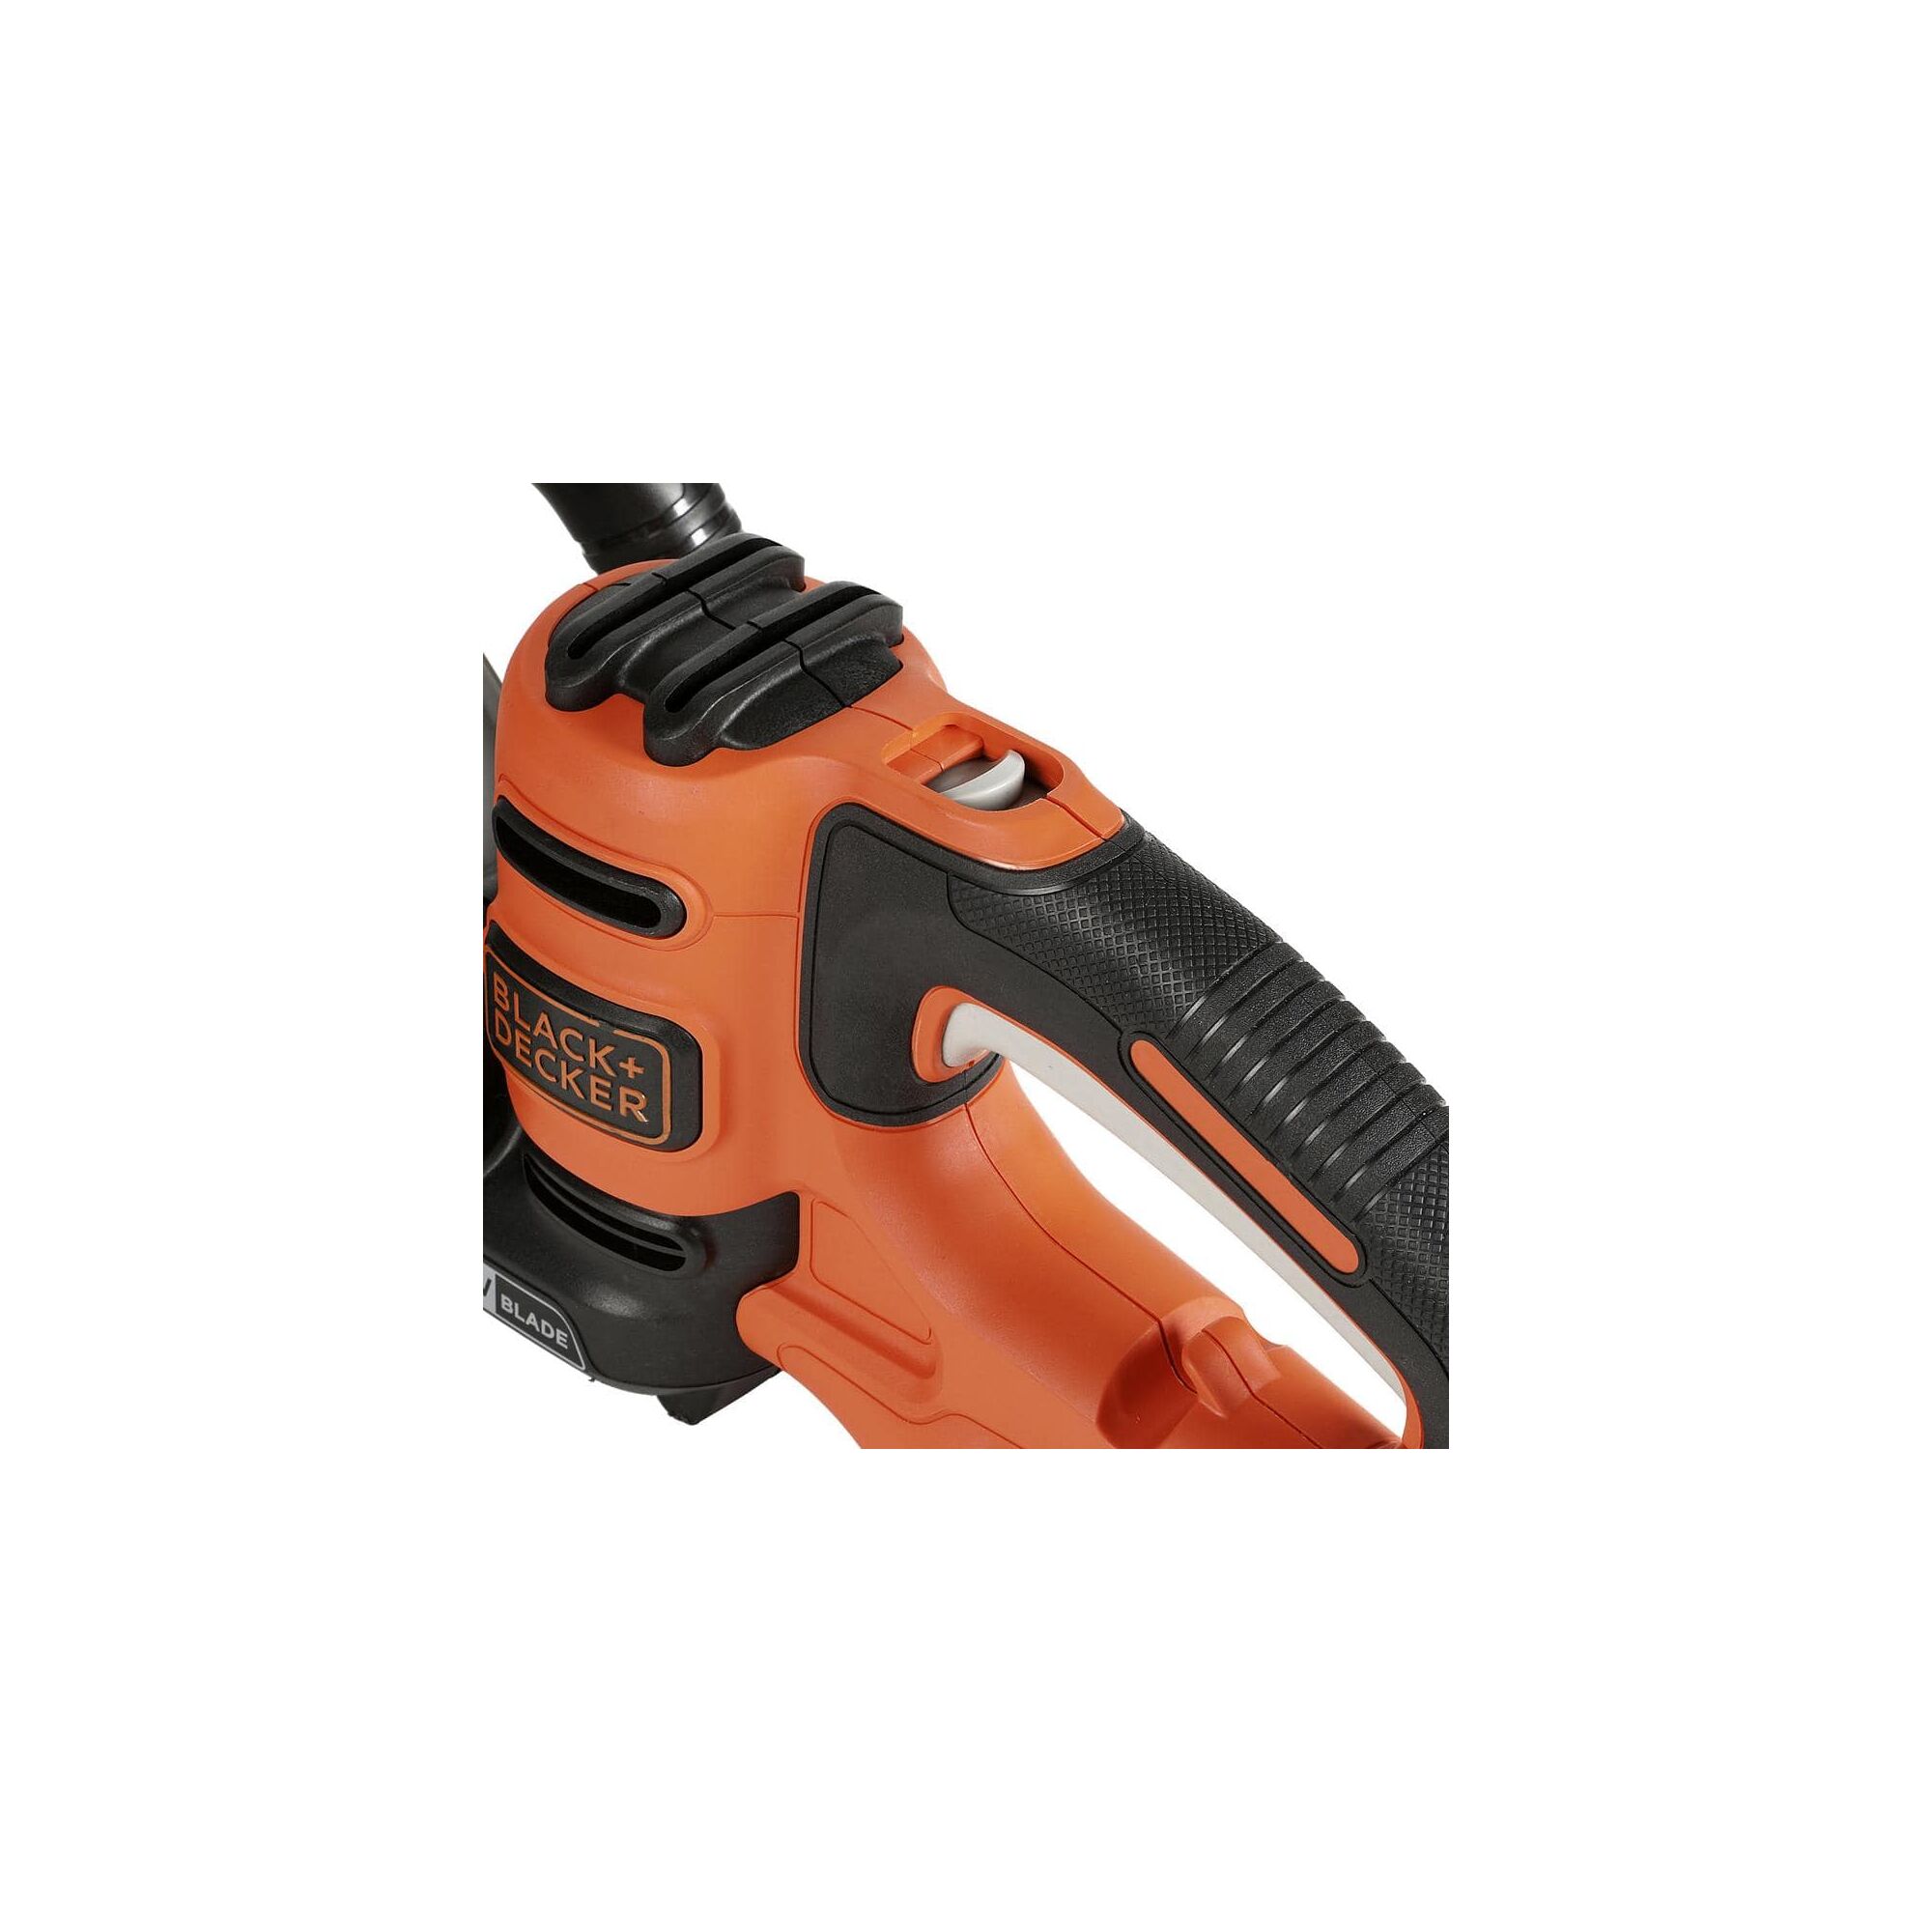 Close up of handle on 20 inch SAWBLADE electric hedge trimmer